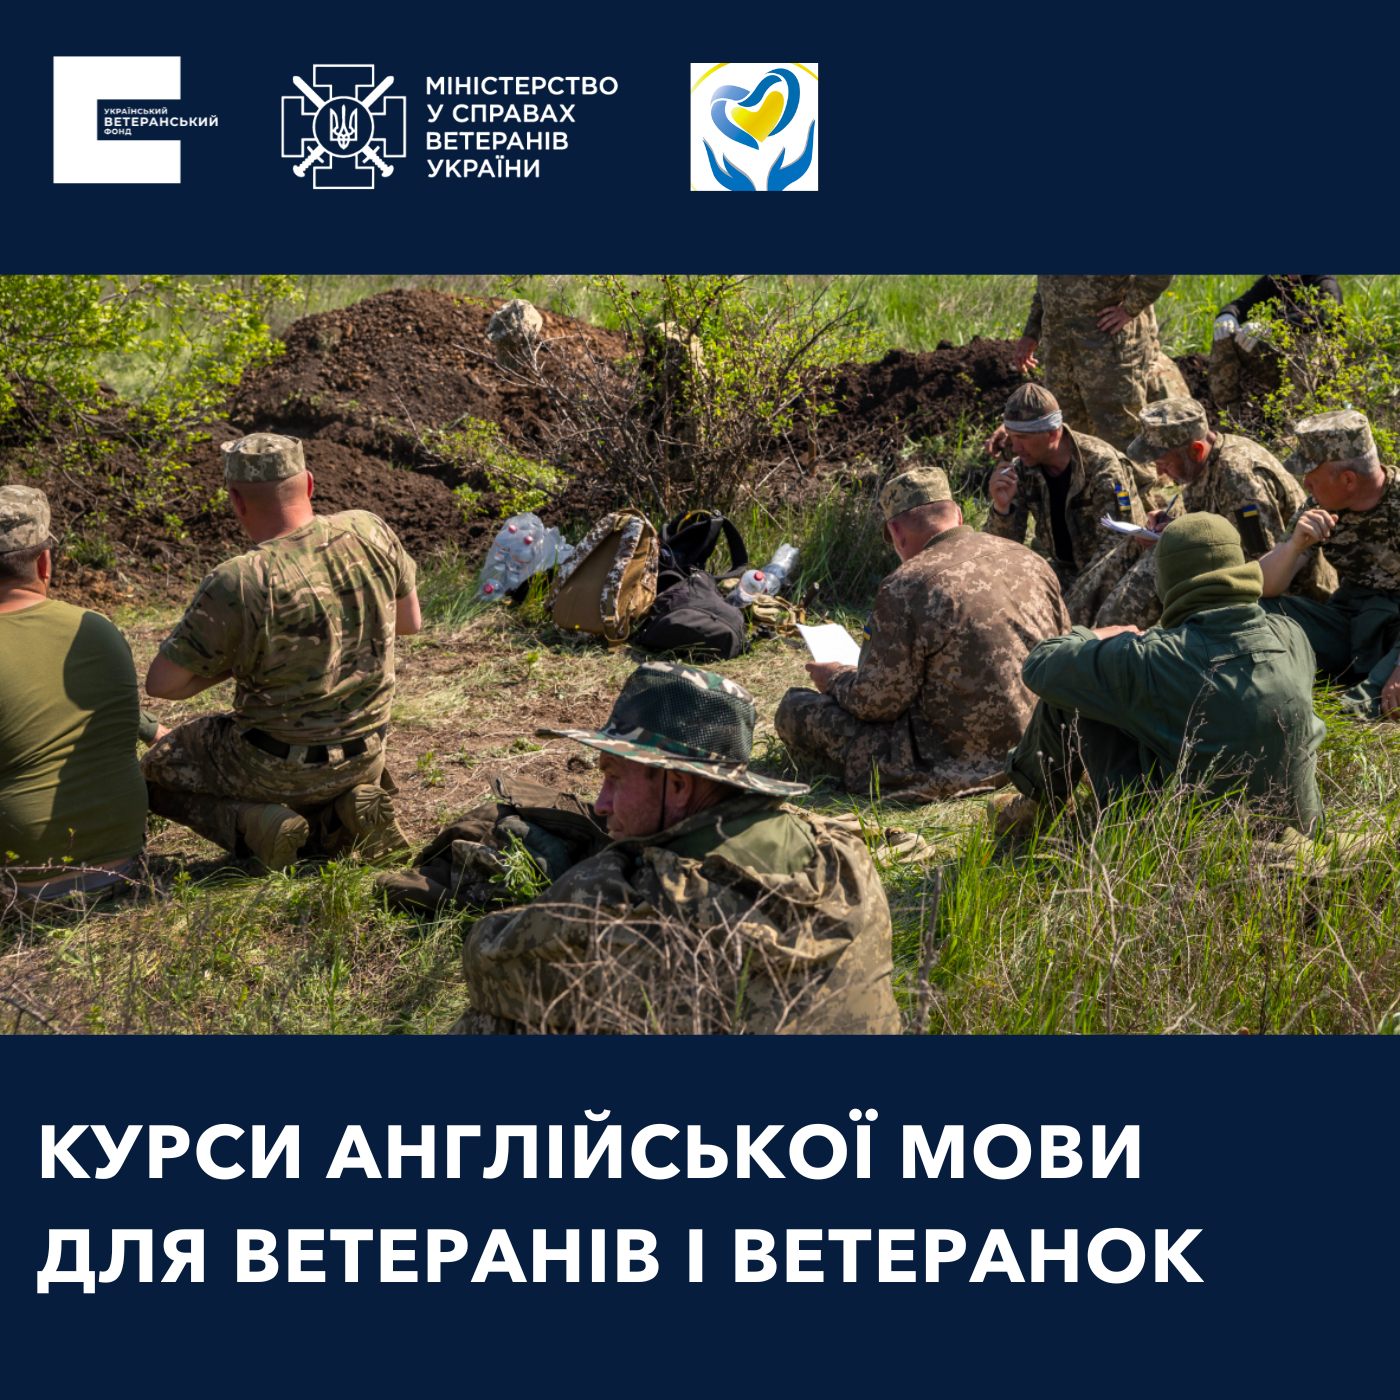 Ukrainian veterans can take free English courses with native speakers